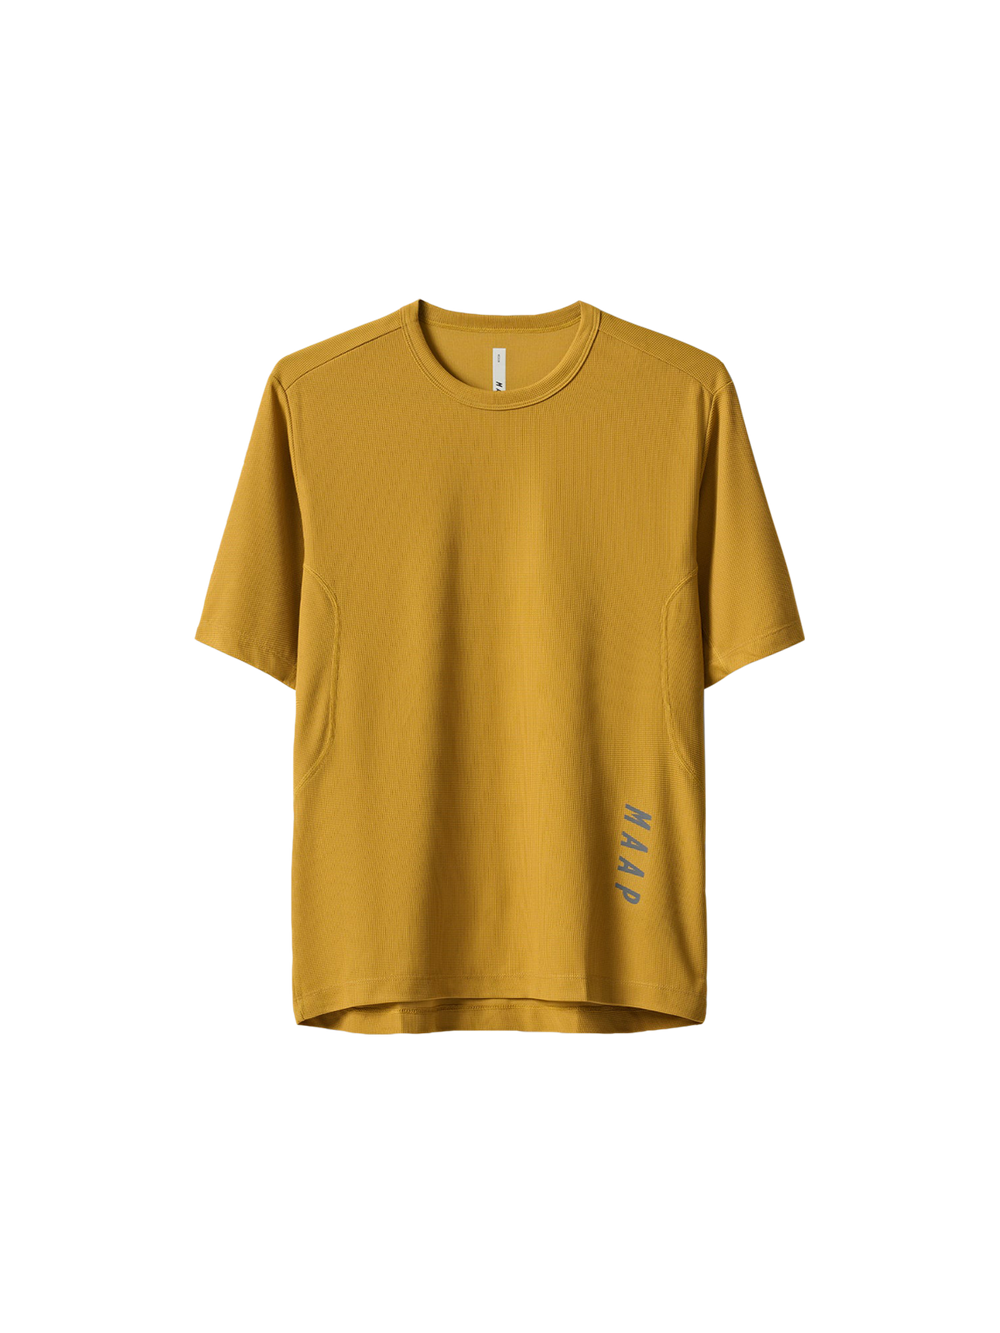 Product Image for Alt_Road Ride Tee 3.0